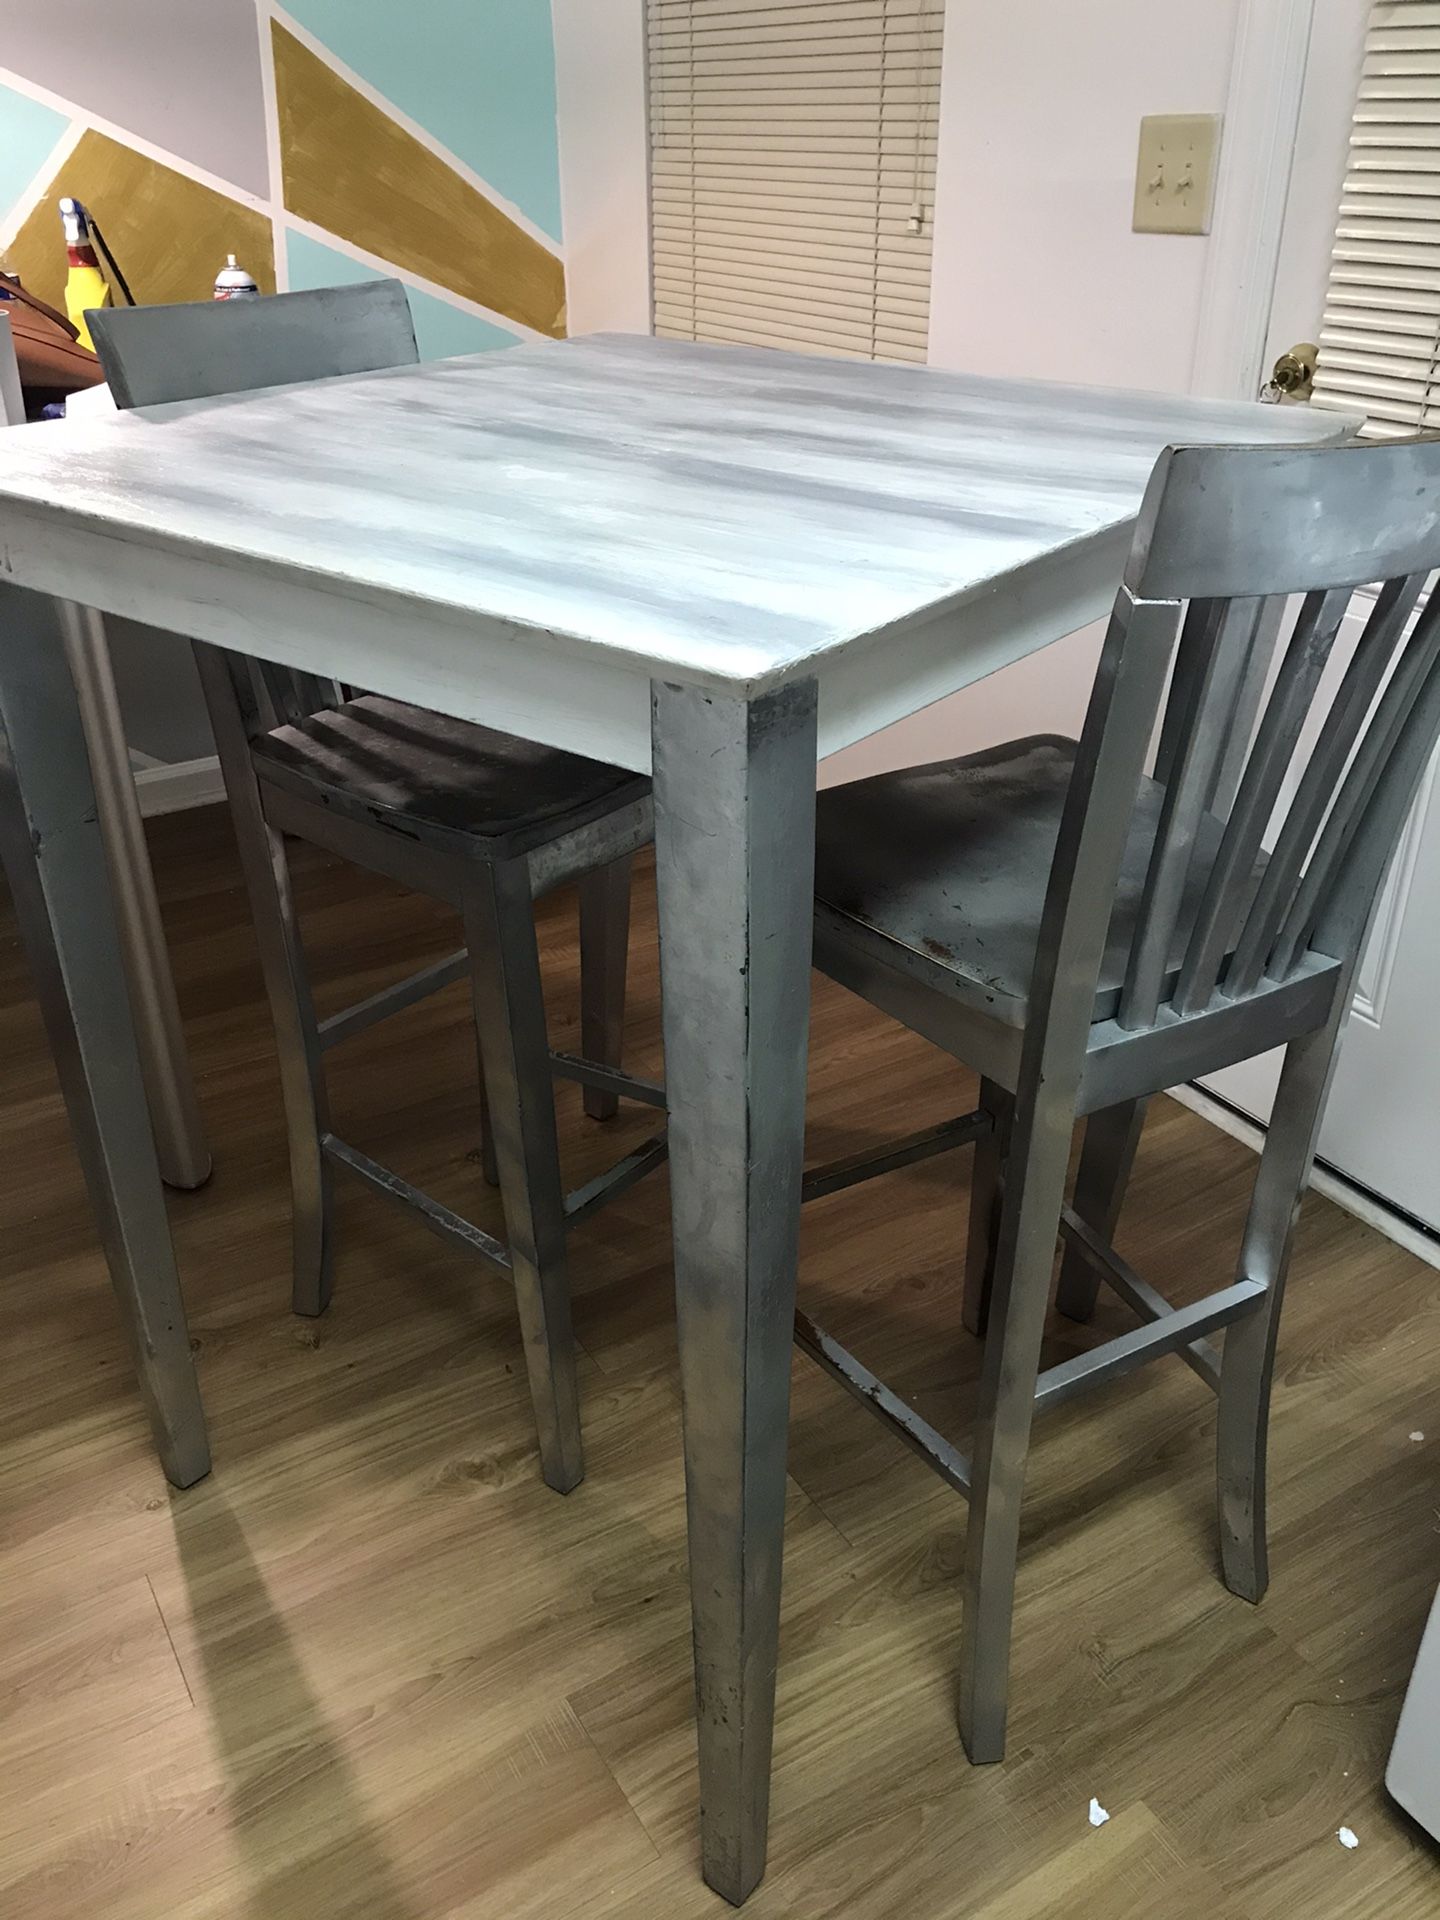 Wooden Bar height table